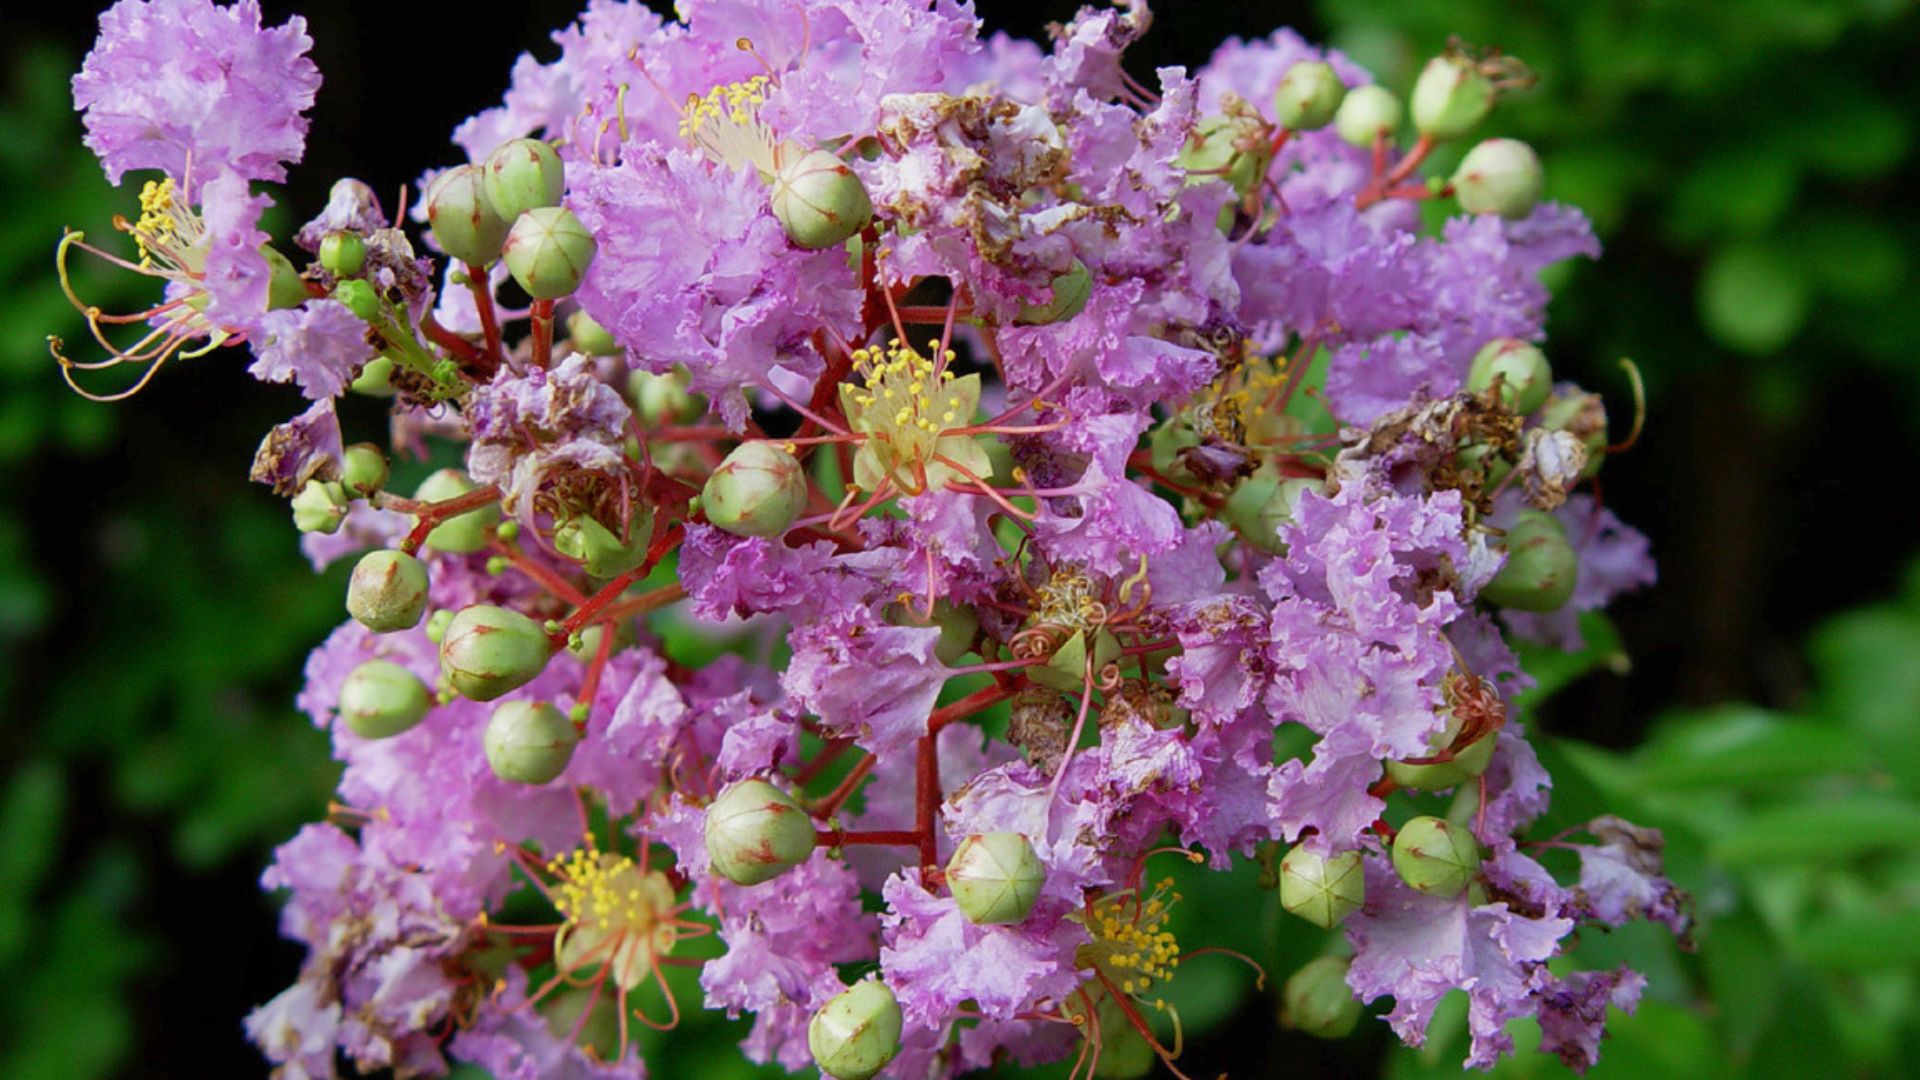 When You Should Prune Your Crepe Myrtle For Beautiful Blooms Next Season